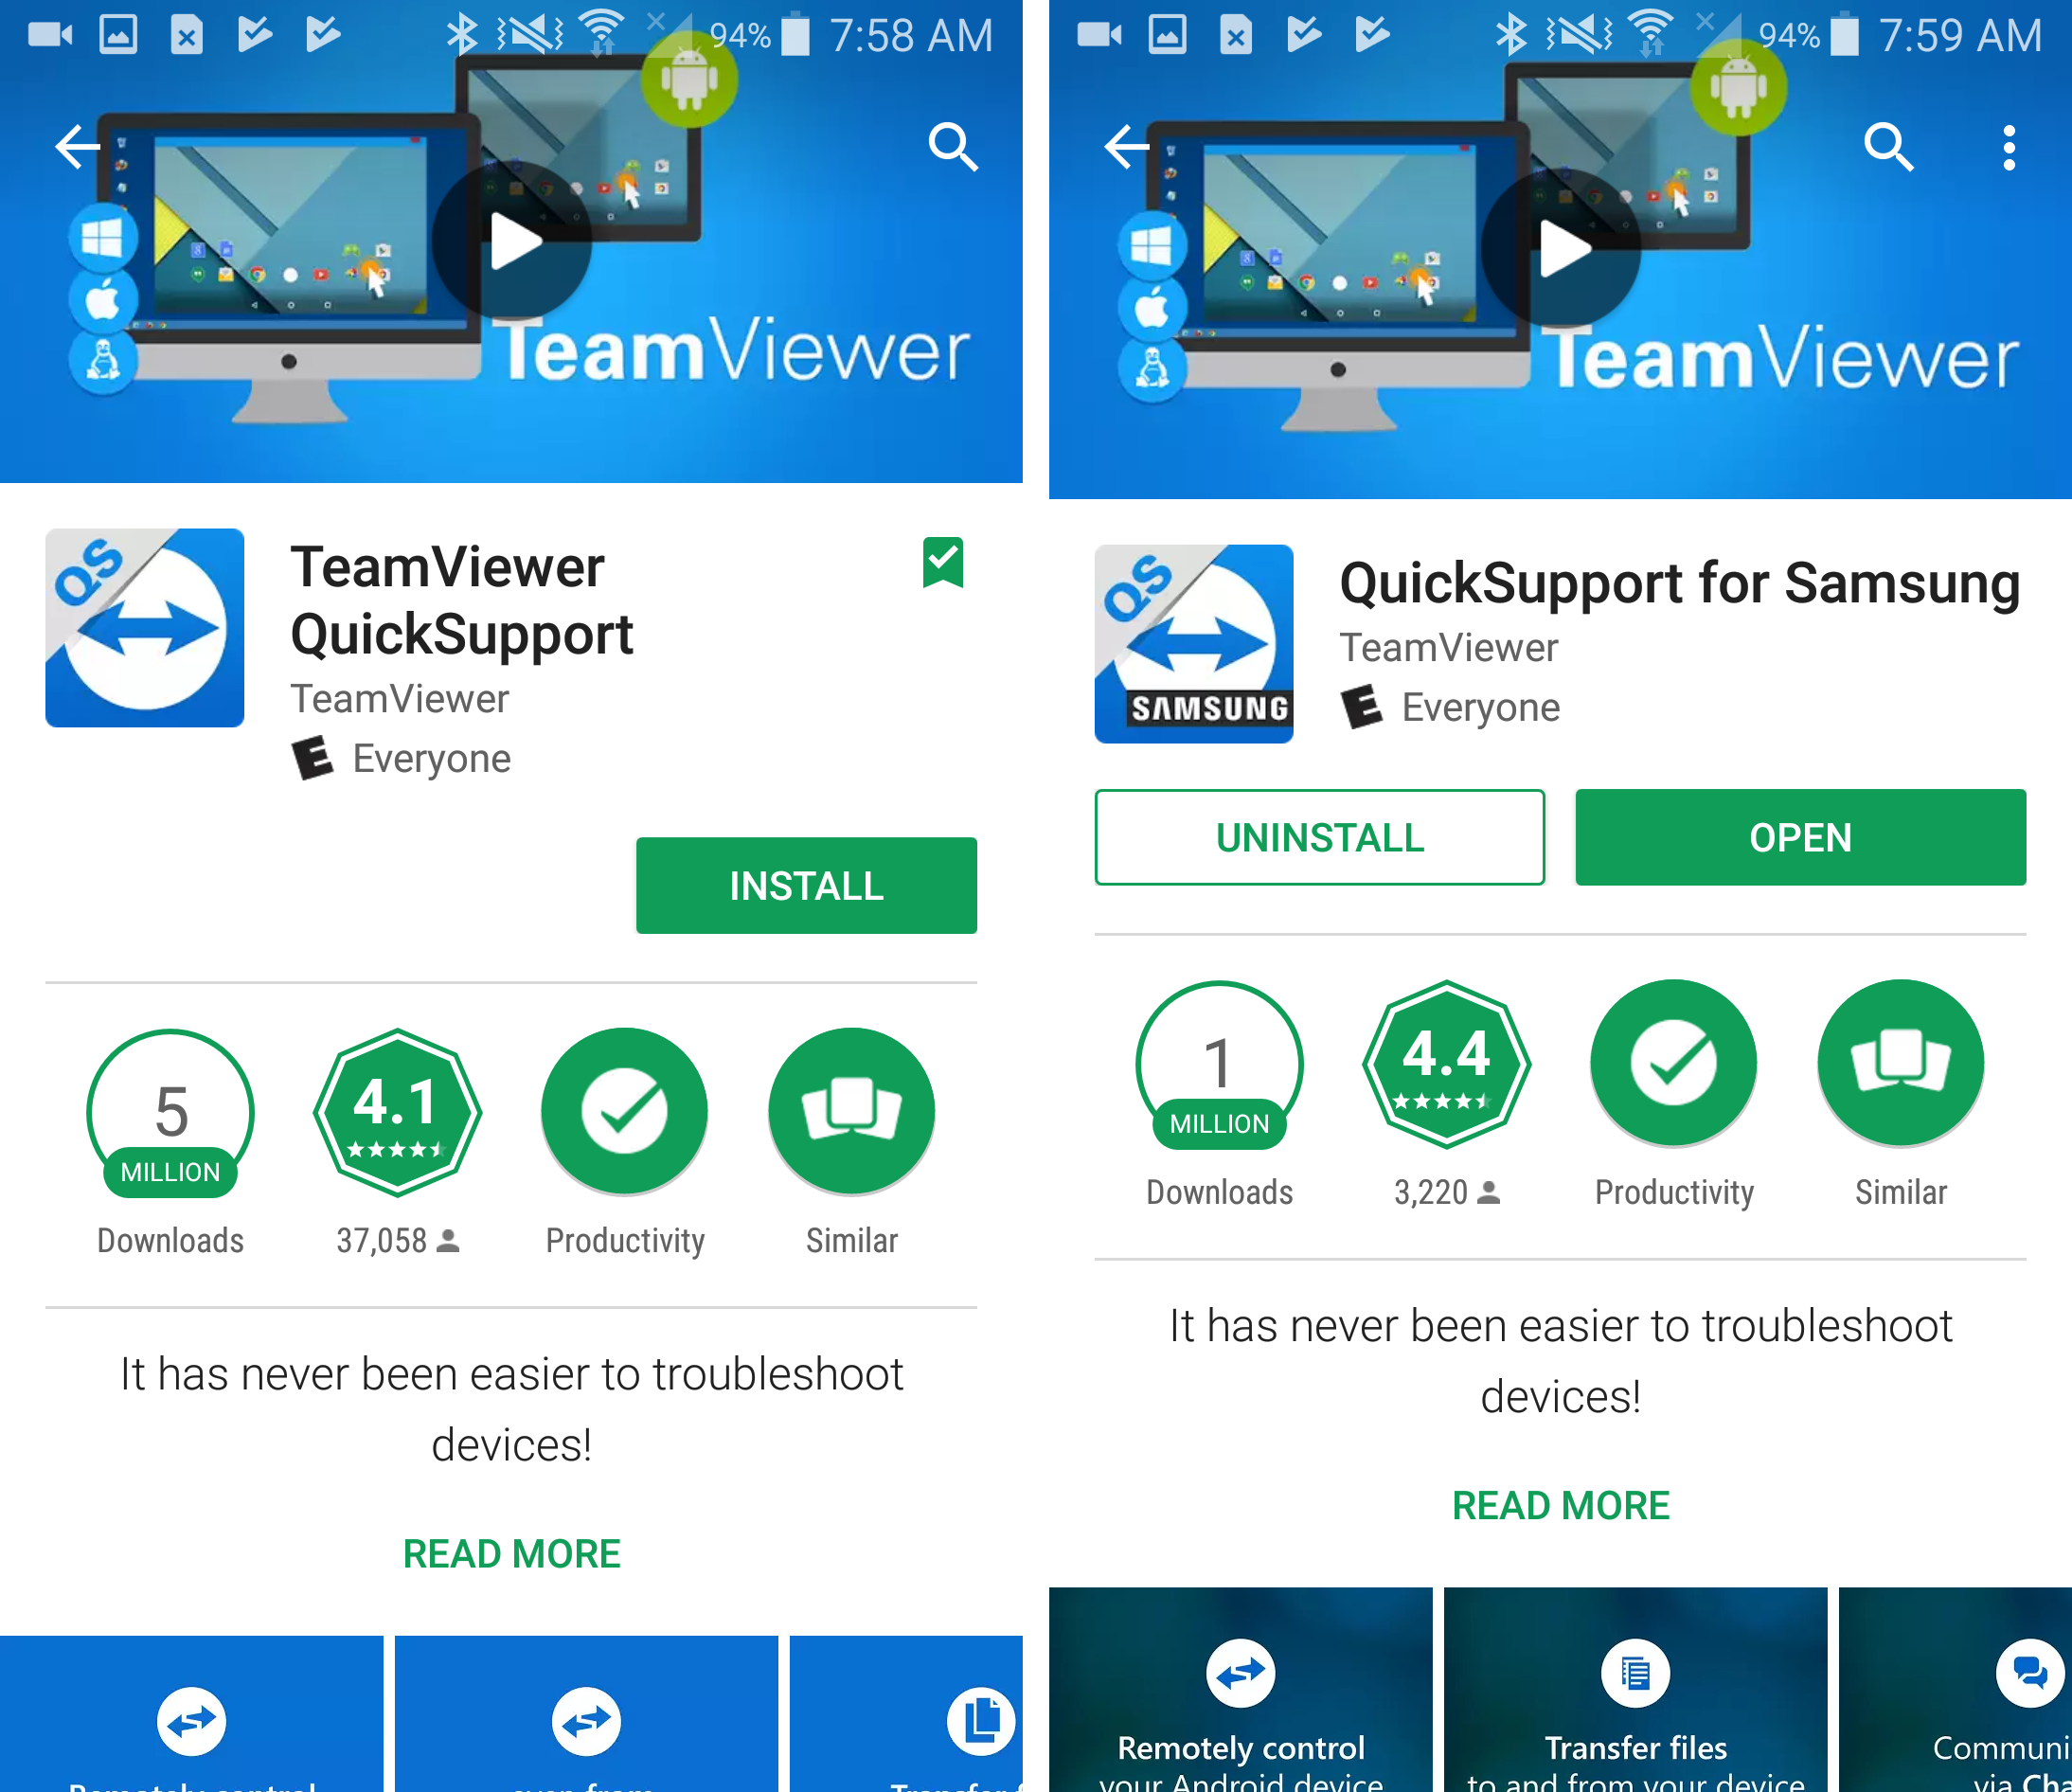 how to send teamviewer quicksupport to download firestick